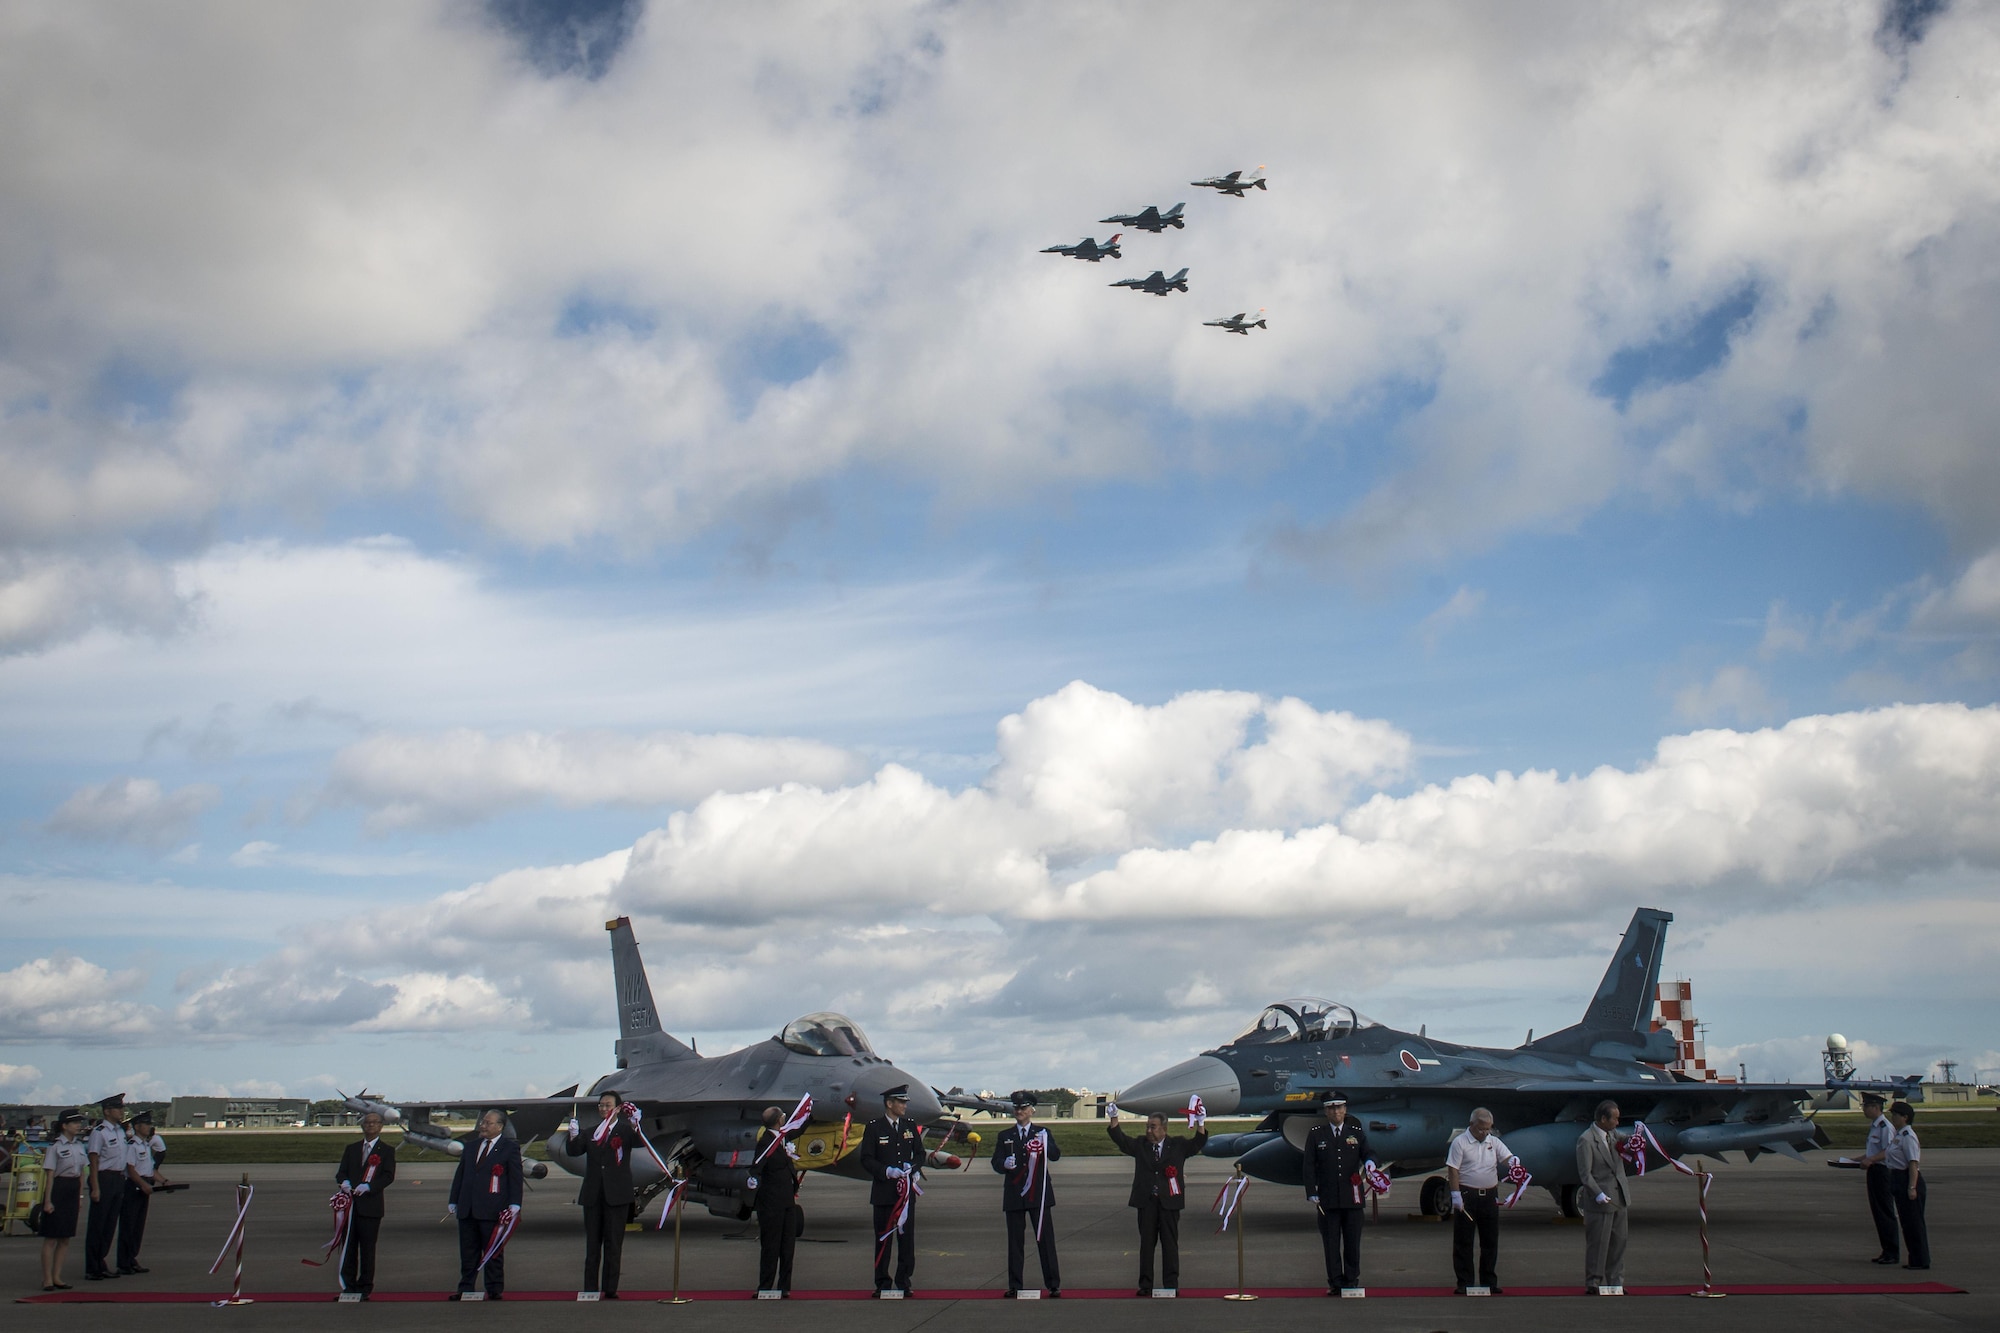 Japanese Air Self-Defense Force and Misawa City officials with U.S. Air Force Col. R. Scott Jobe, the 35th Fighter Wing commander, cut the ribbon as a five-jet formation flies over during Misawa Air Fest 2016’s opening ceremony at Misawa Air Base, Japan, Sept. 11, 2016. The 35th Fighter Wing’s F-16 Fighting Falcon and JASDF 3rd Air Wing’s F-2 serve as a backdrop during the ceremony. More than 80,000 people from Aomori Prefecture and as far as Akita Prefecture attended the annual air show, highlighting the close U.S. and Japan bilateral partnership in the area. (U.S. Air Force photo by Staff Sgt. Benjamin W. Stratton)